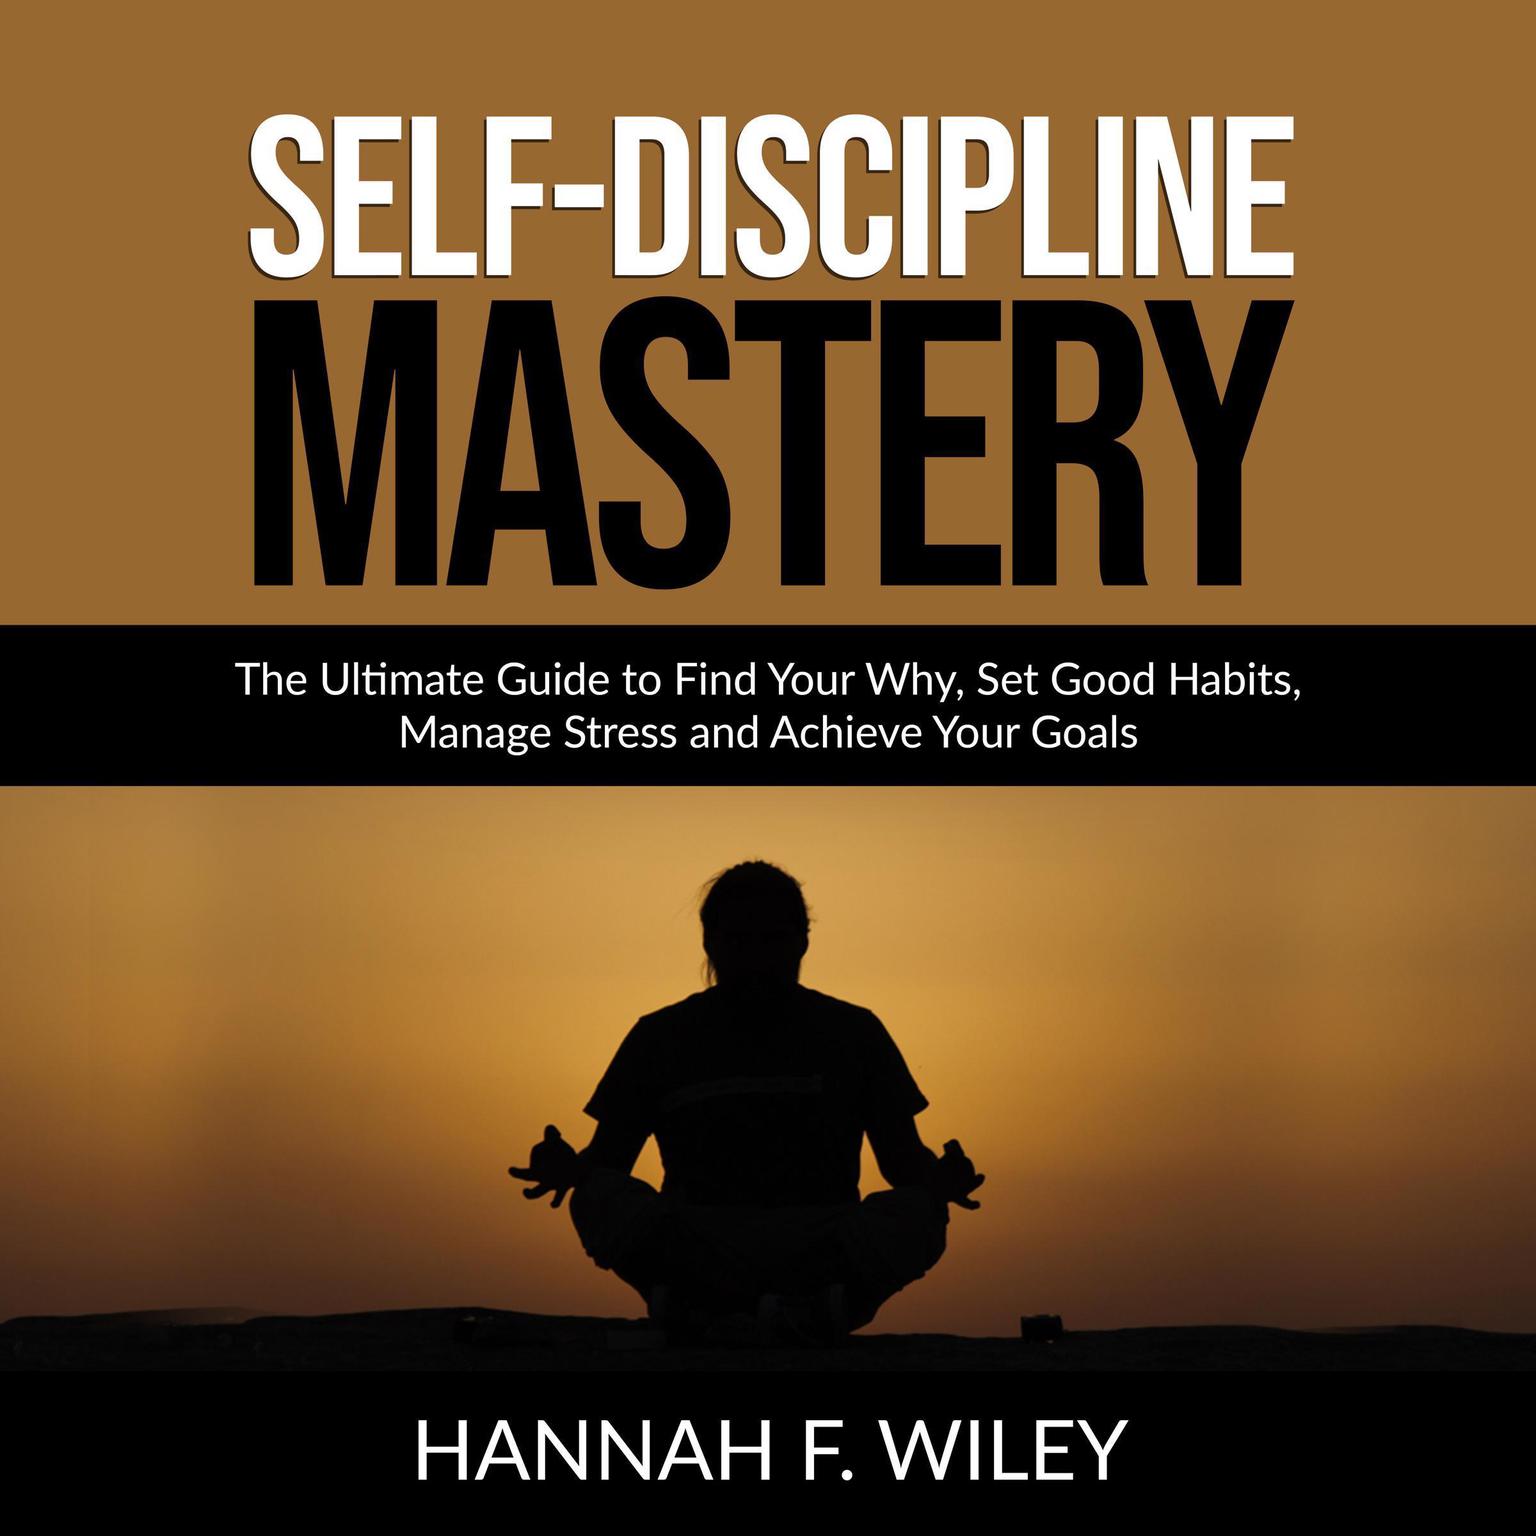 Self-Discipline Mastery: The Ultimate Guide to Find Your Why, Set Good Habits, Manage Stress and Achieve Your Goals Audiobook, by Hannah F. Wiley